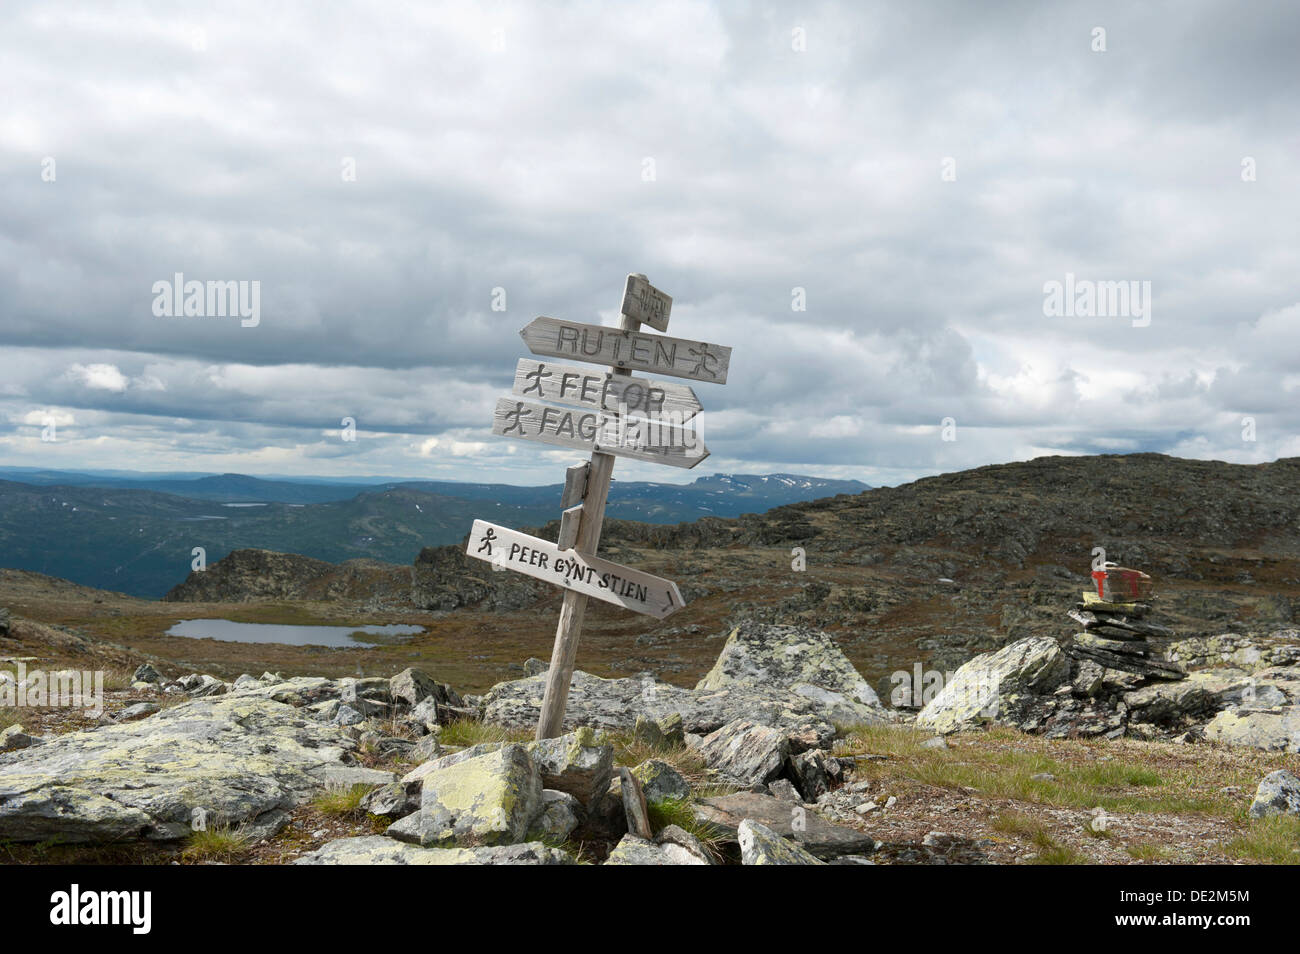 Upland fjell, Peer Gynt Stien hiking trail, signposts at Mt Ruten, 1516m, towards Fefor, Oppland, Norway, Scandinavia Stock Photo